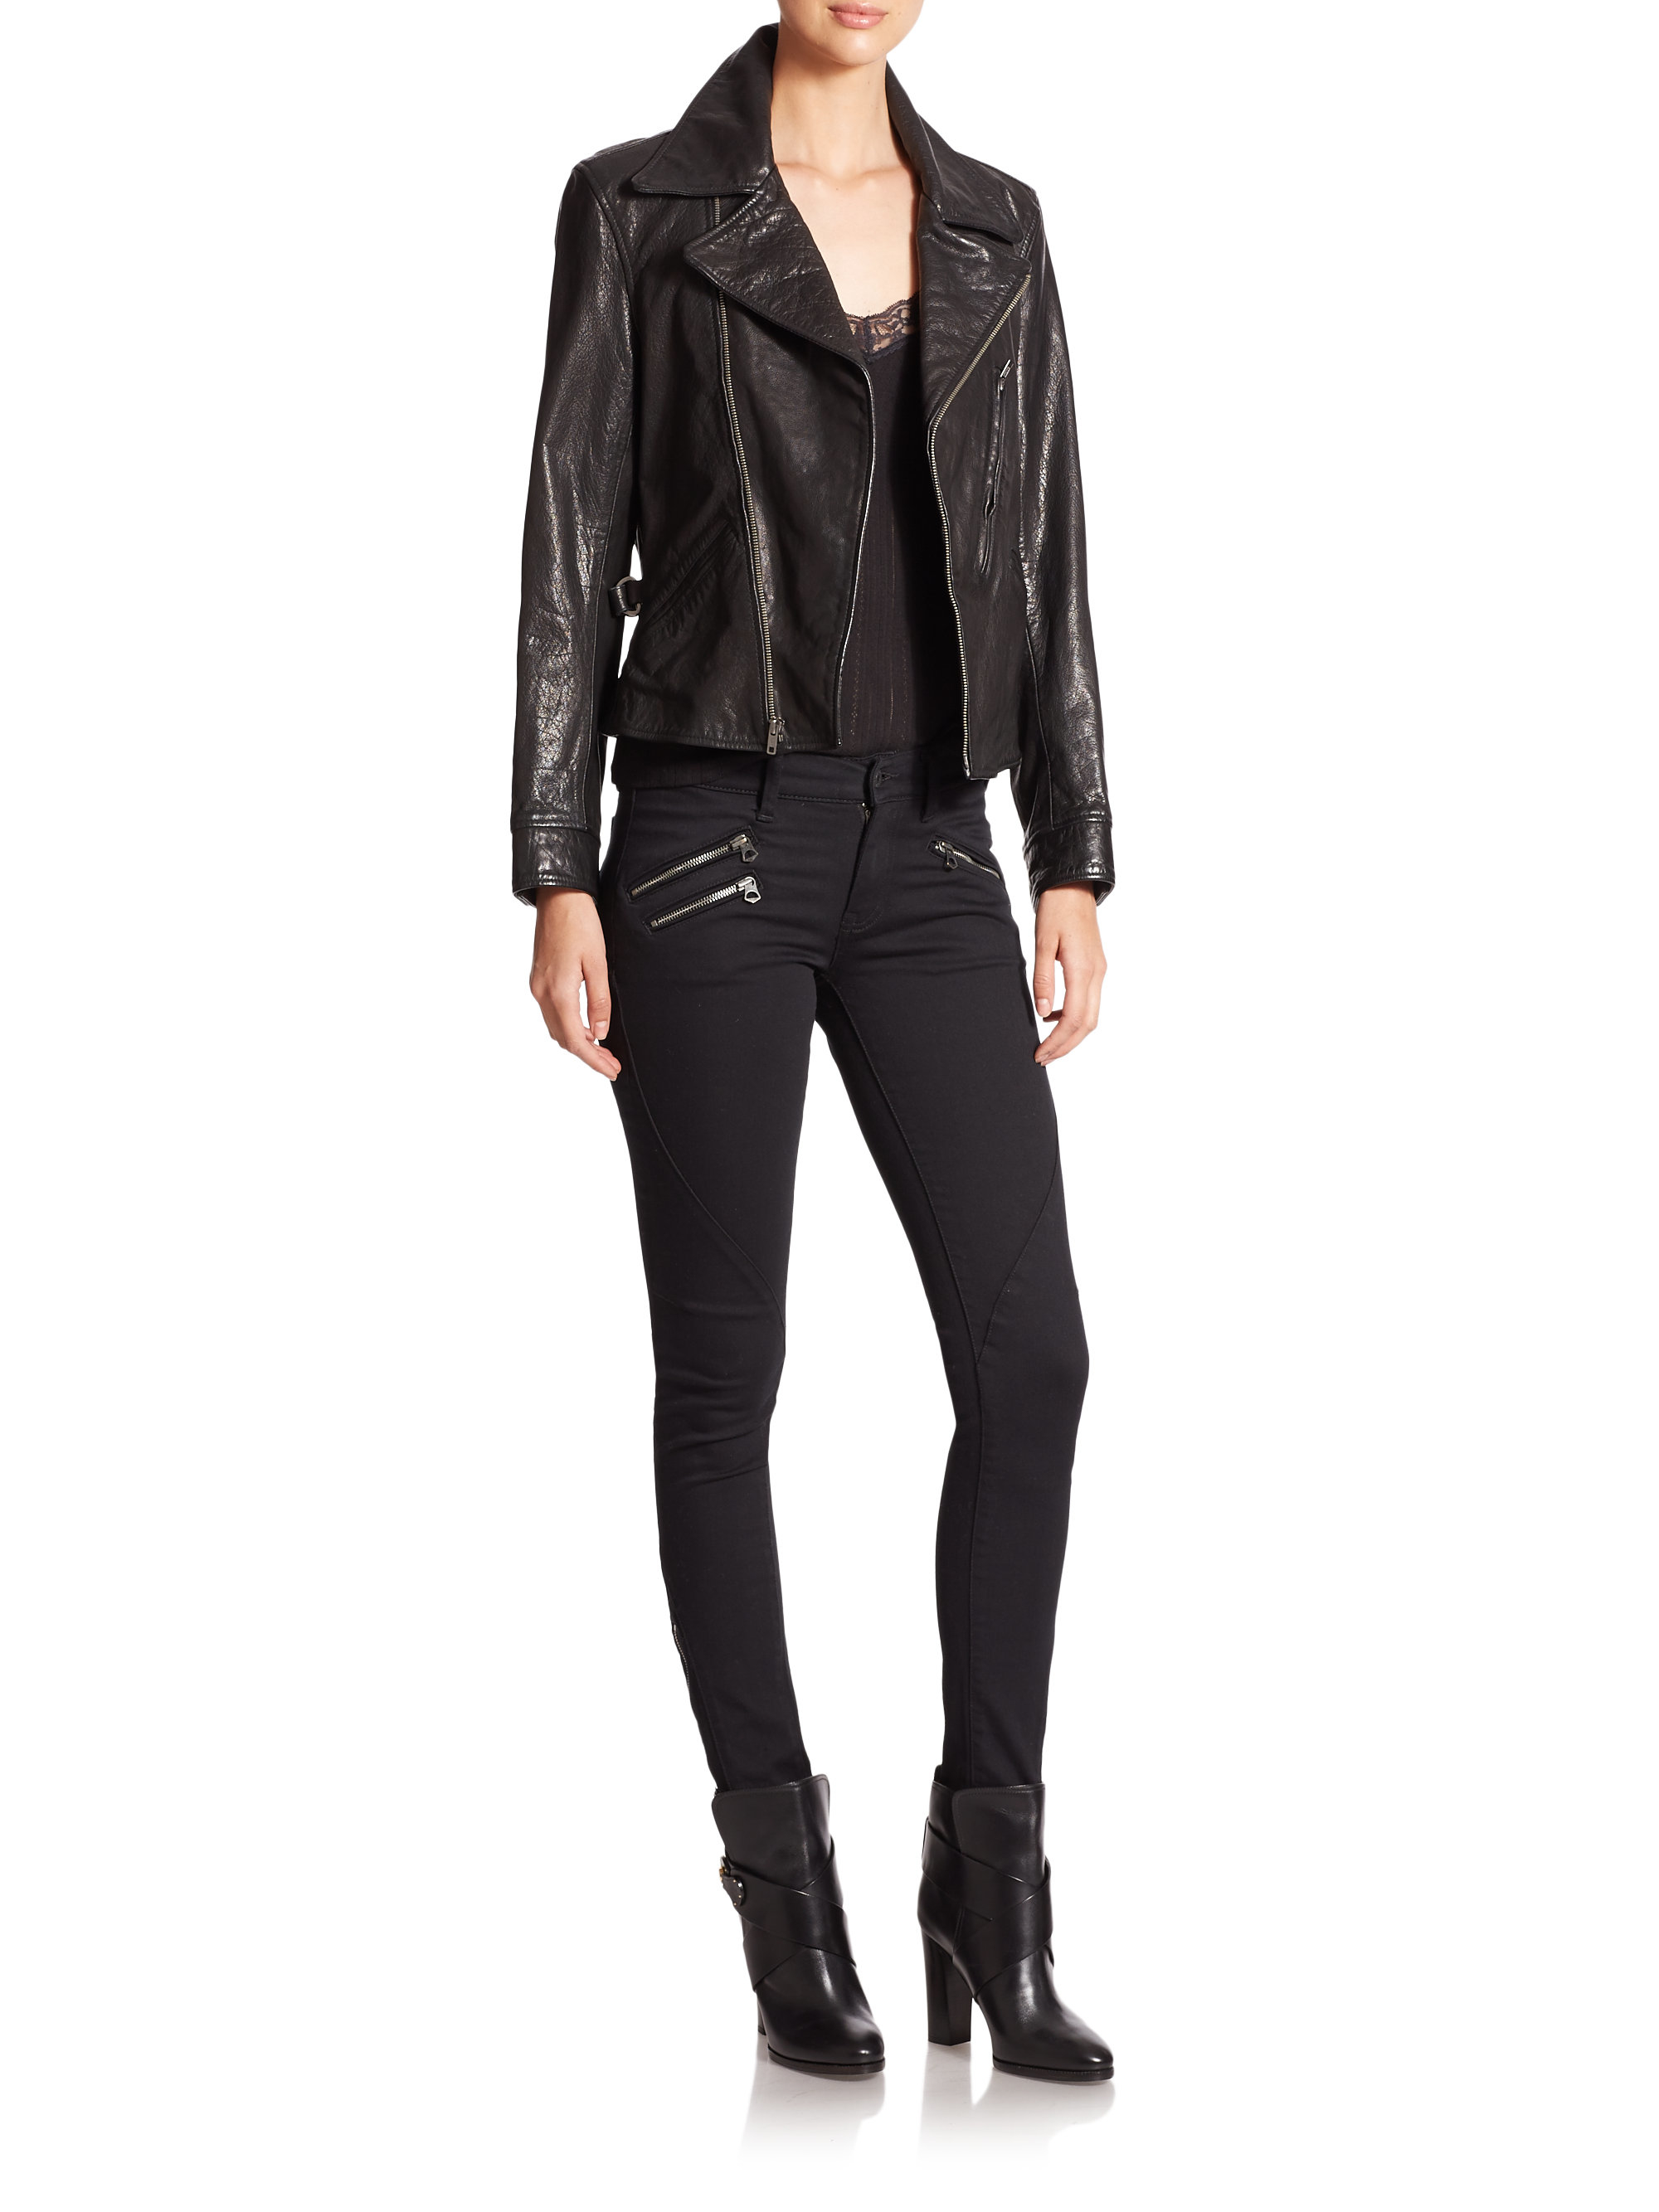 Lyst - Polo Ralph Lauren Washed Leather Moto Jacket in Black